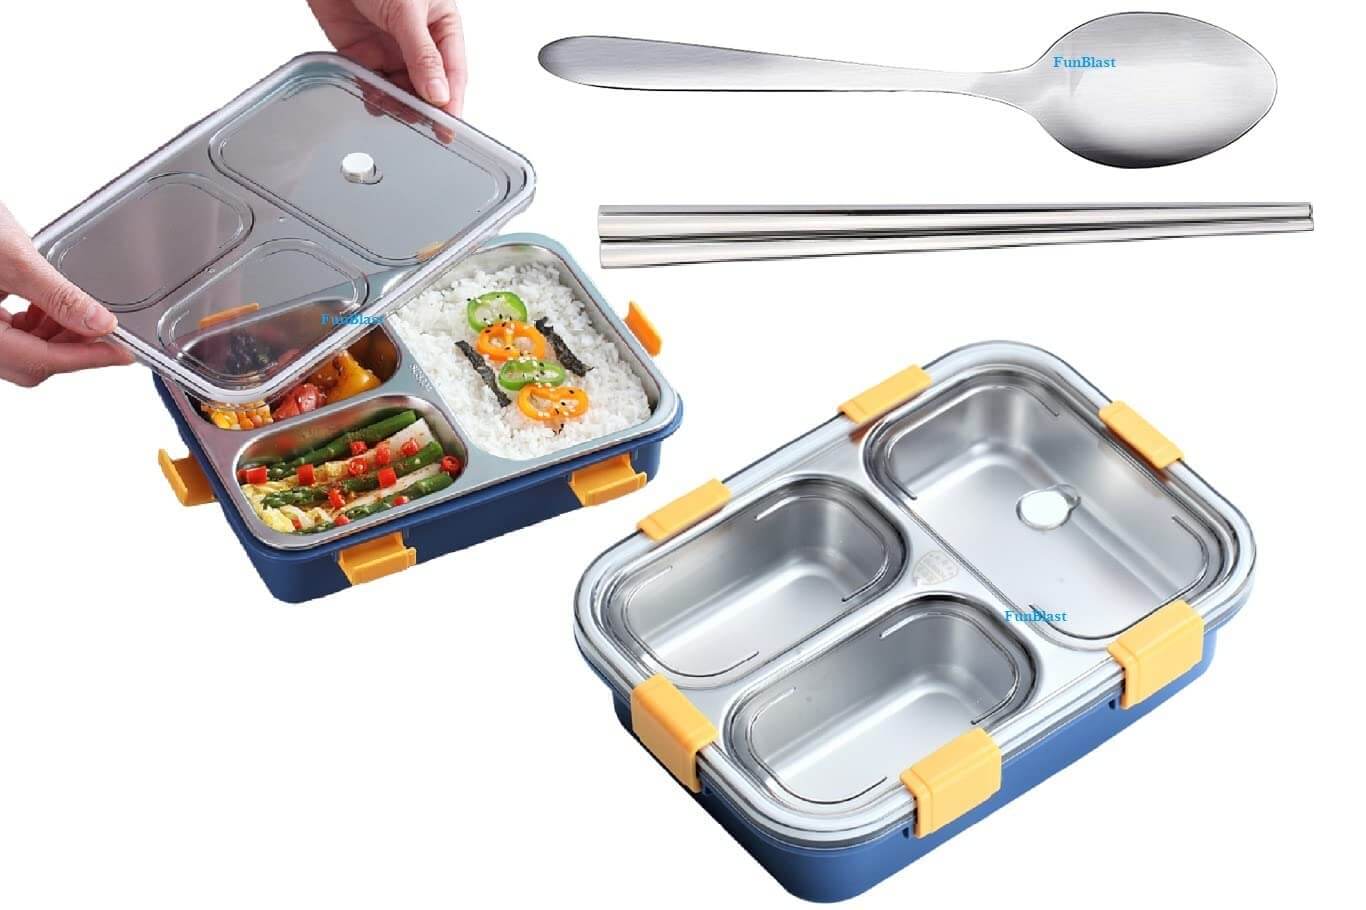 Funblast steel lunch box with spoon and edibles